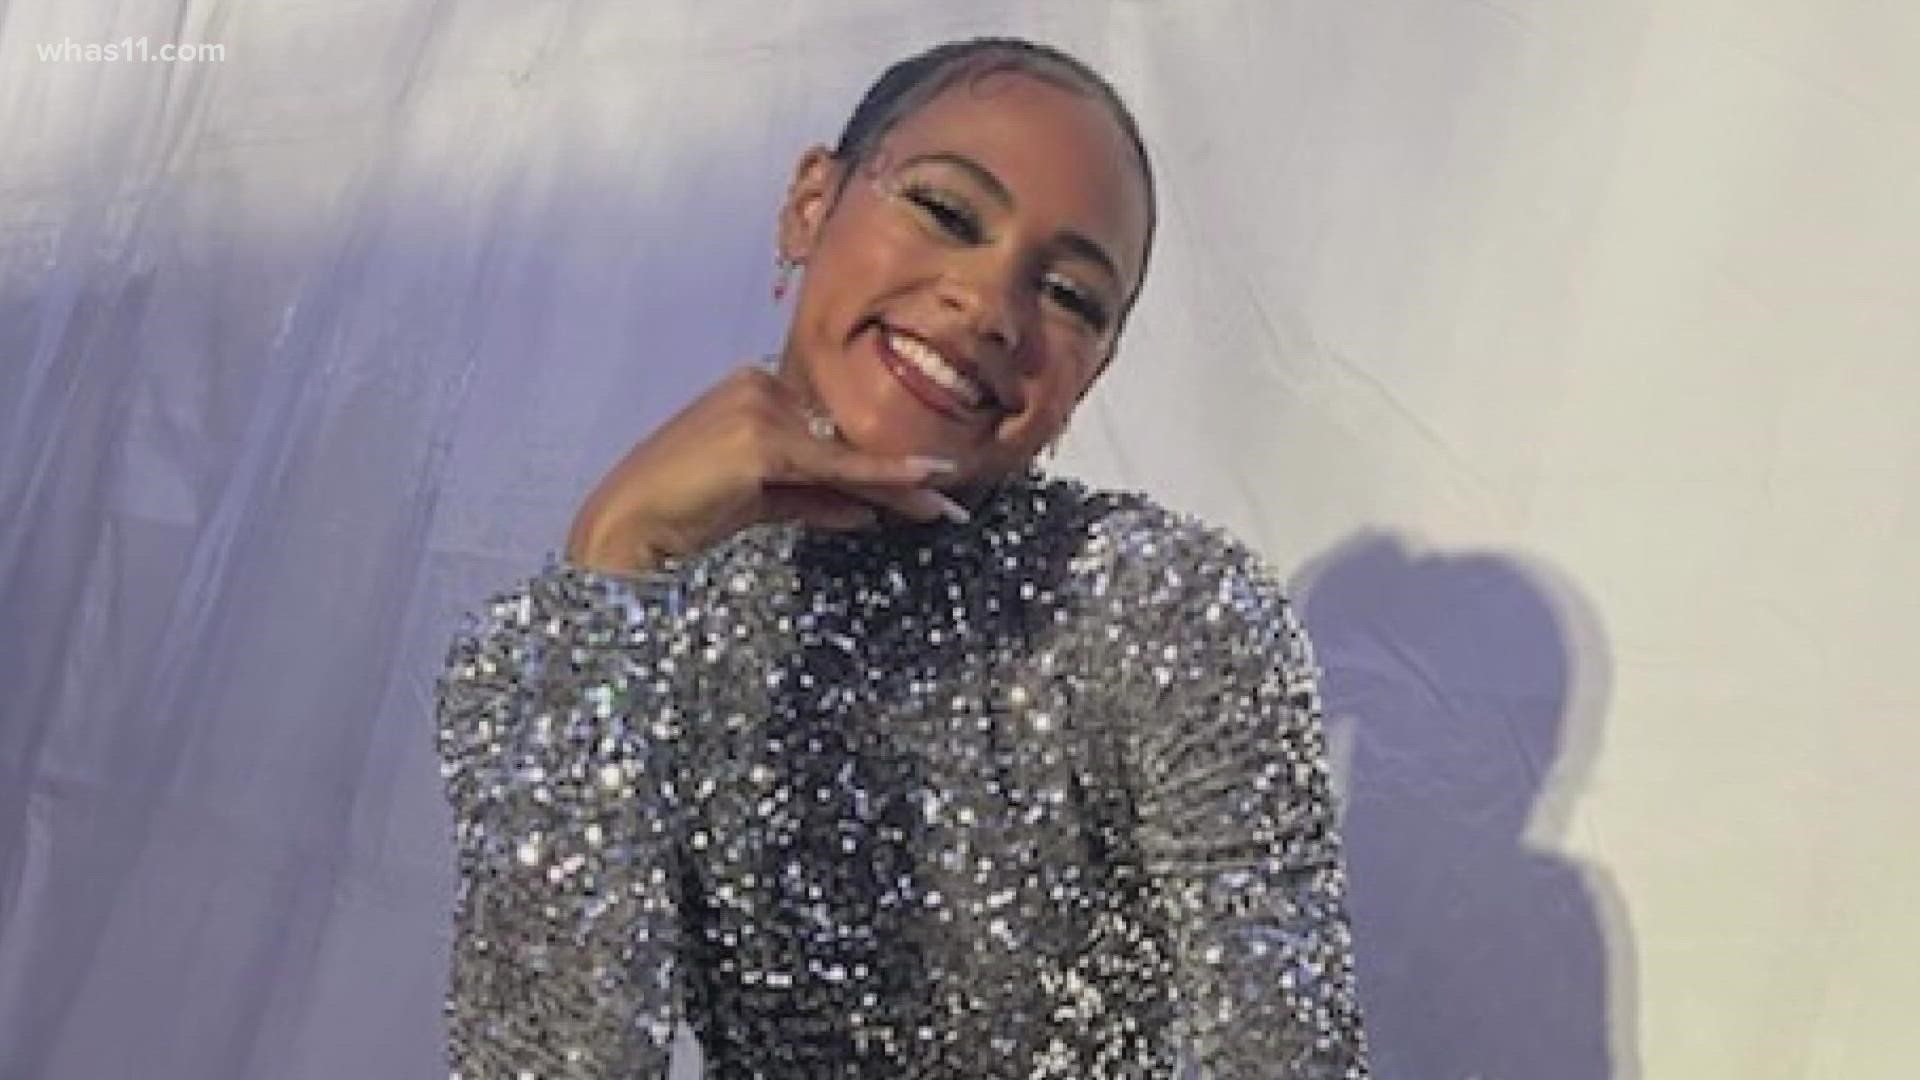 Jhana Waddell has performed at many of the biggest music awards shows alongside Selena Gomez to Bruno Mars and has toured with Lil Baby and Future.